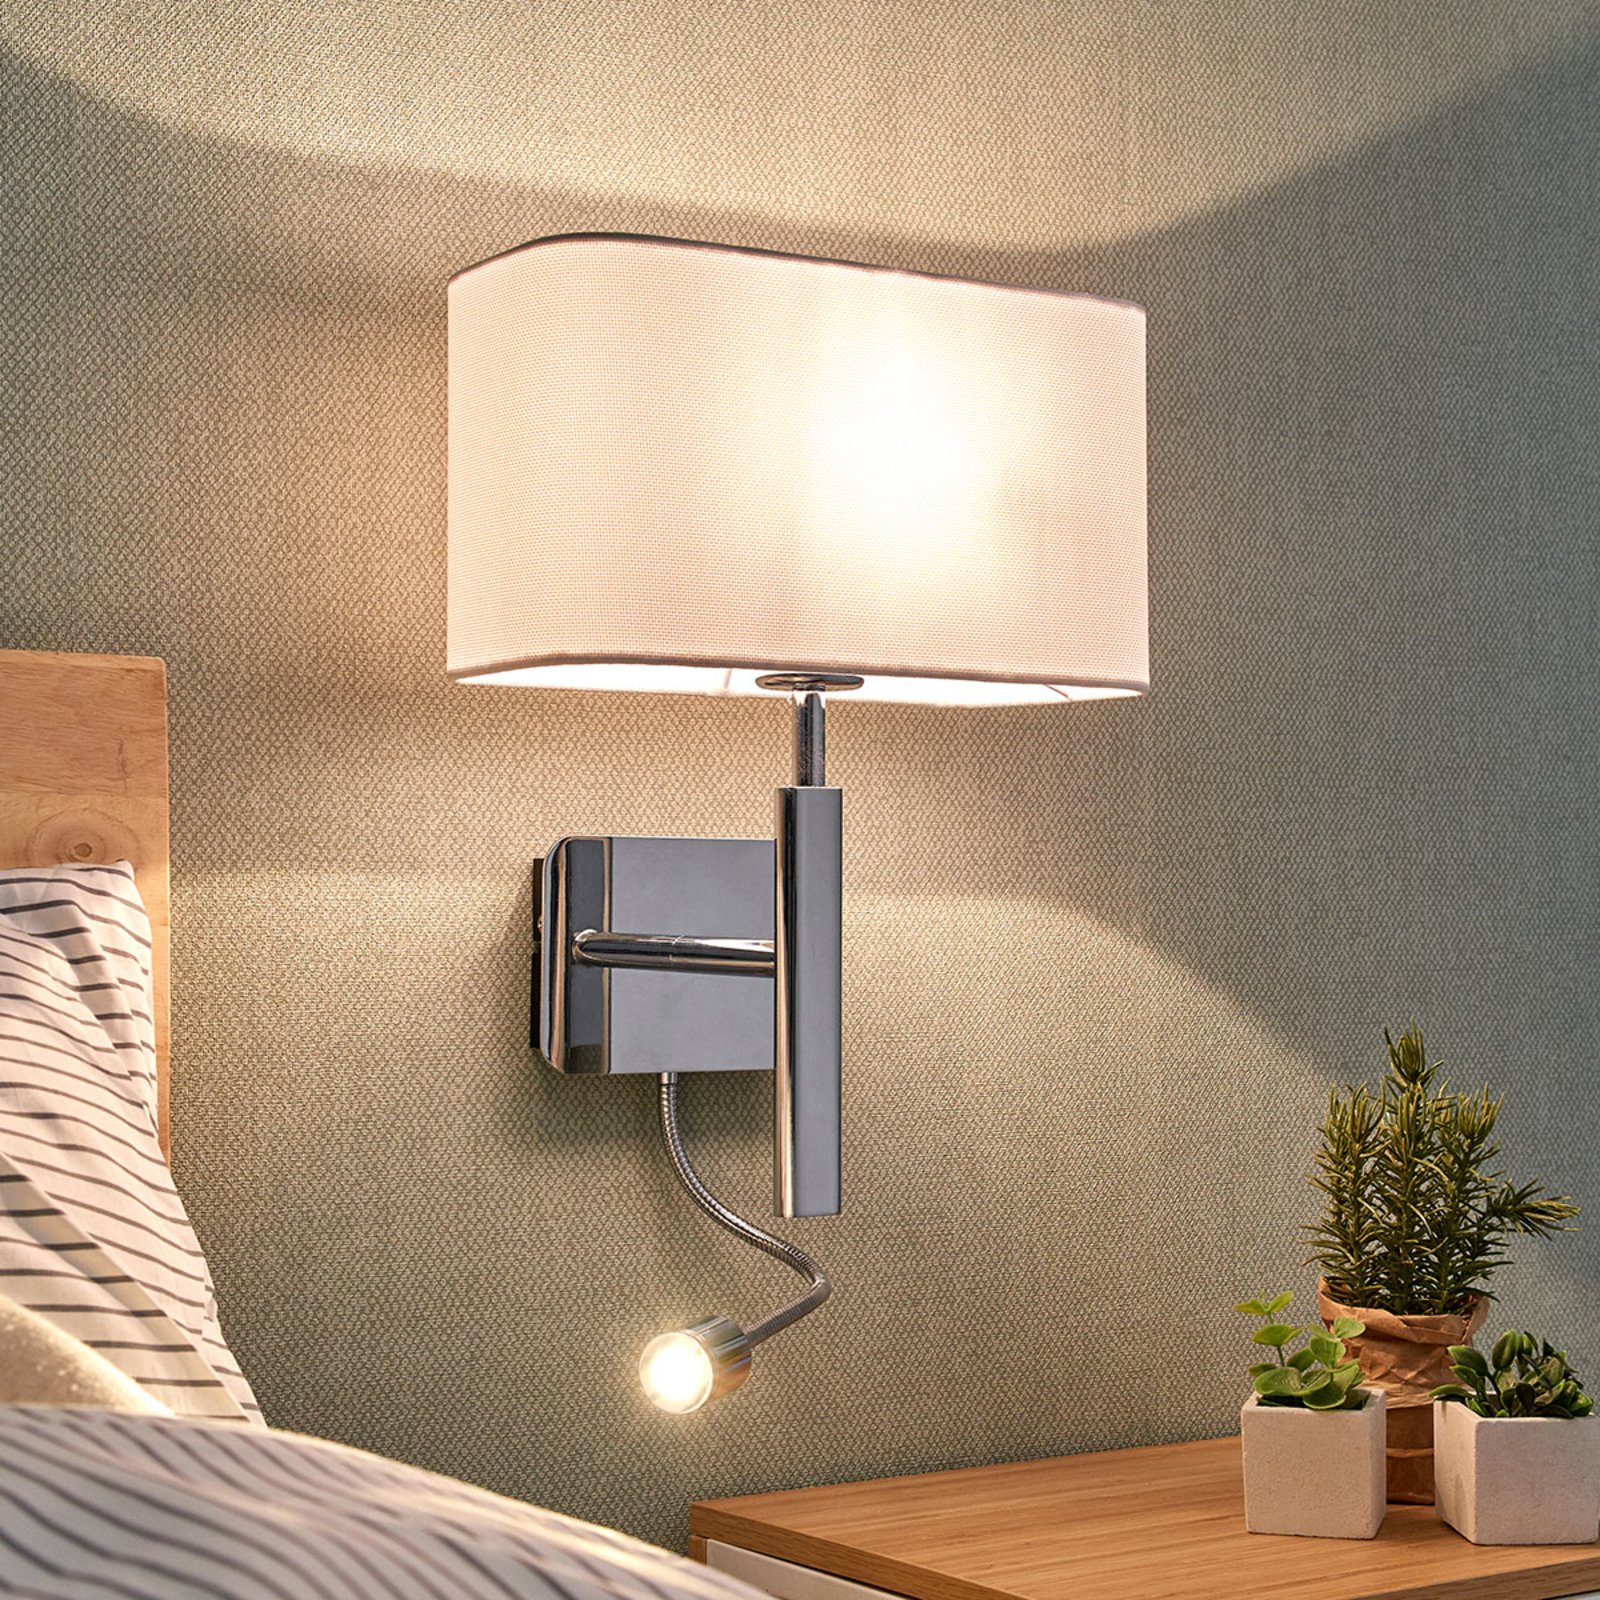 Fabric wall light Jettka with reading arm